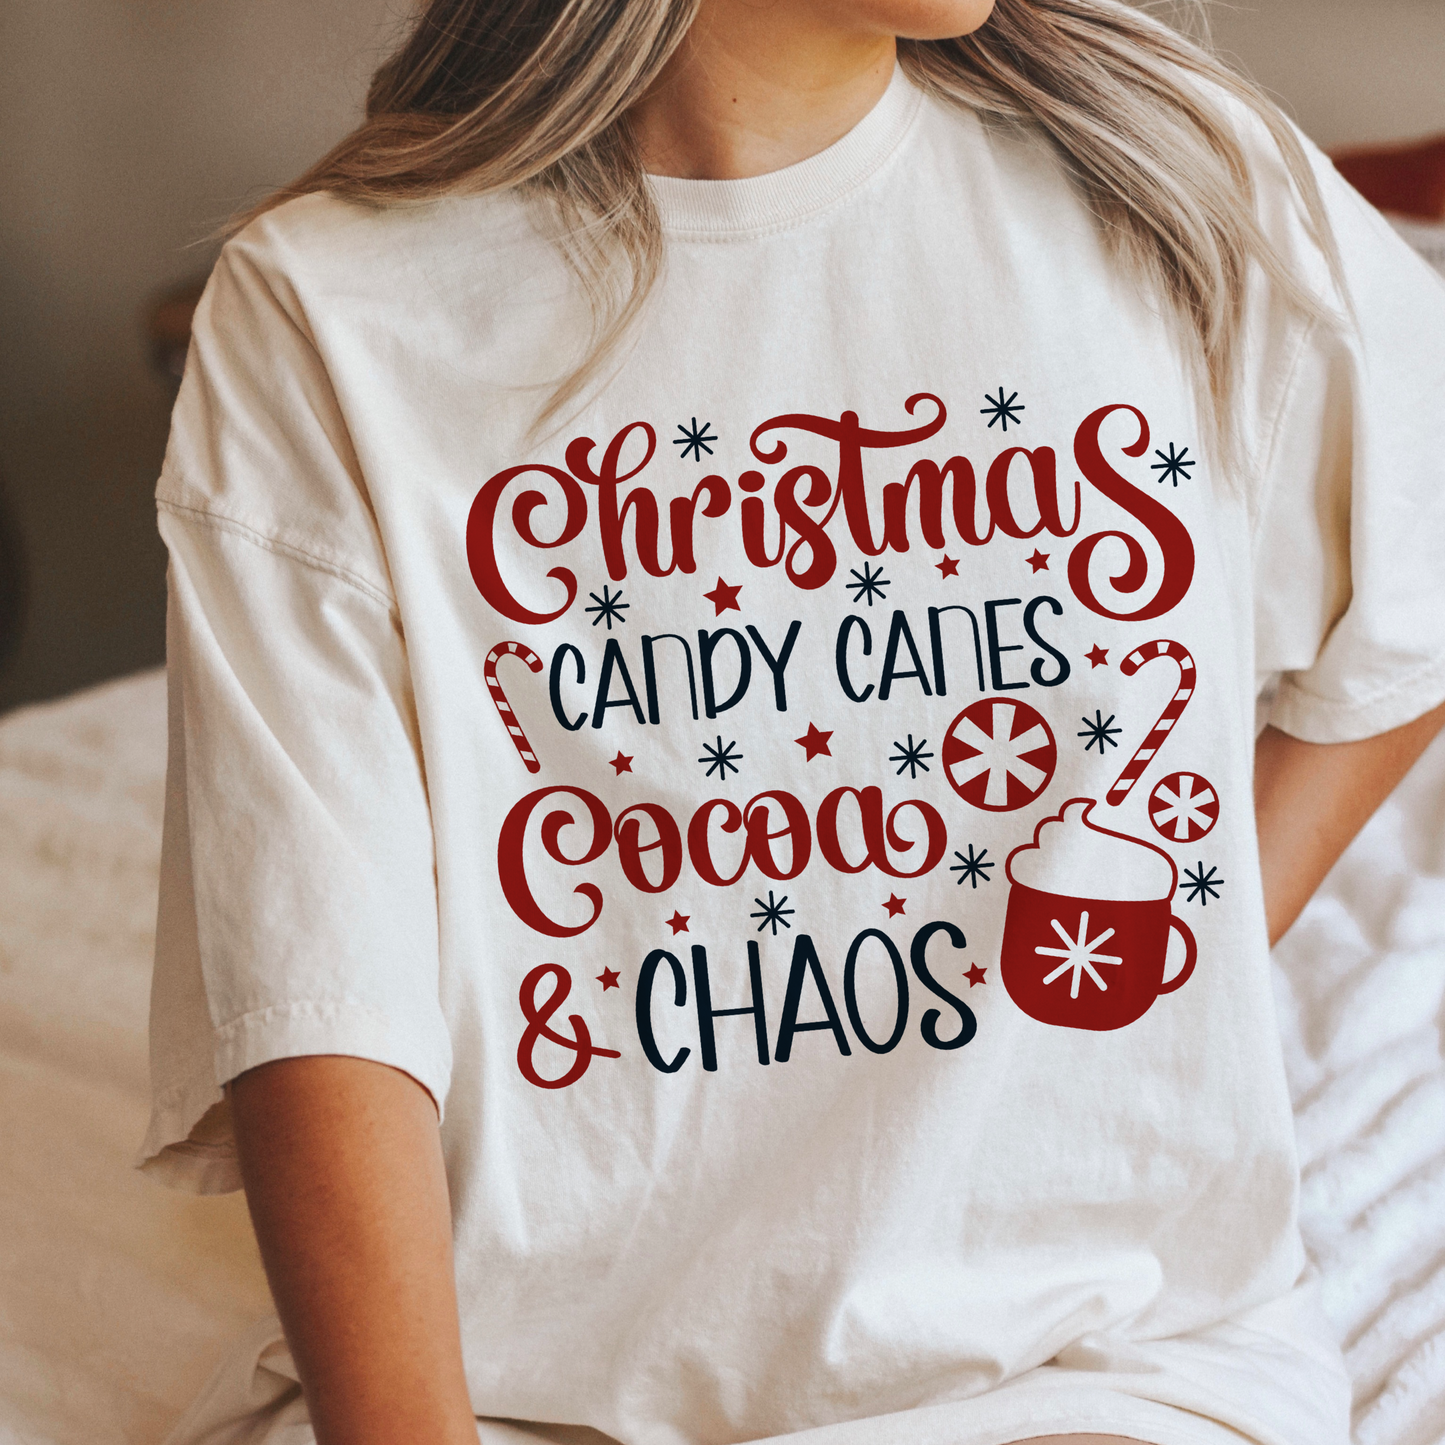 Candy canes Cocoa and Chaos Christmas t shirt